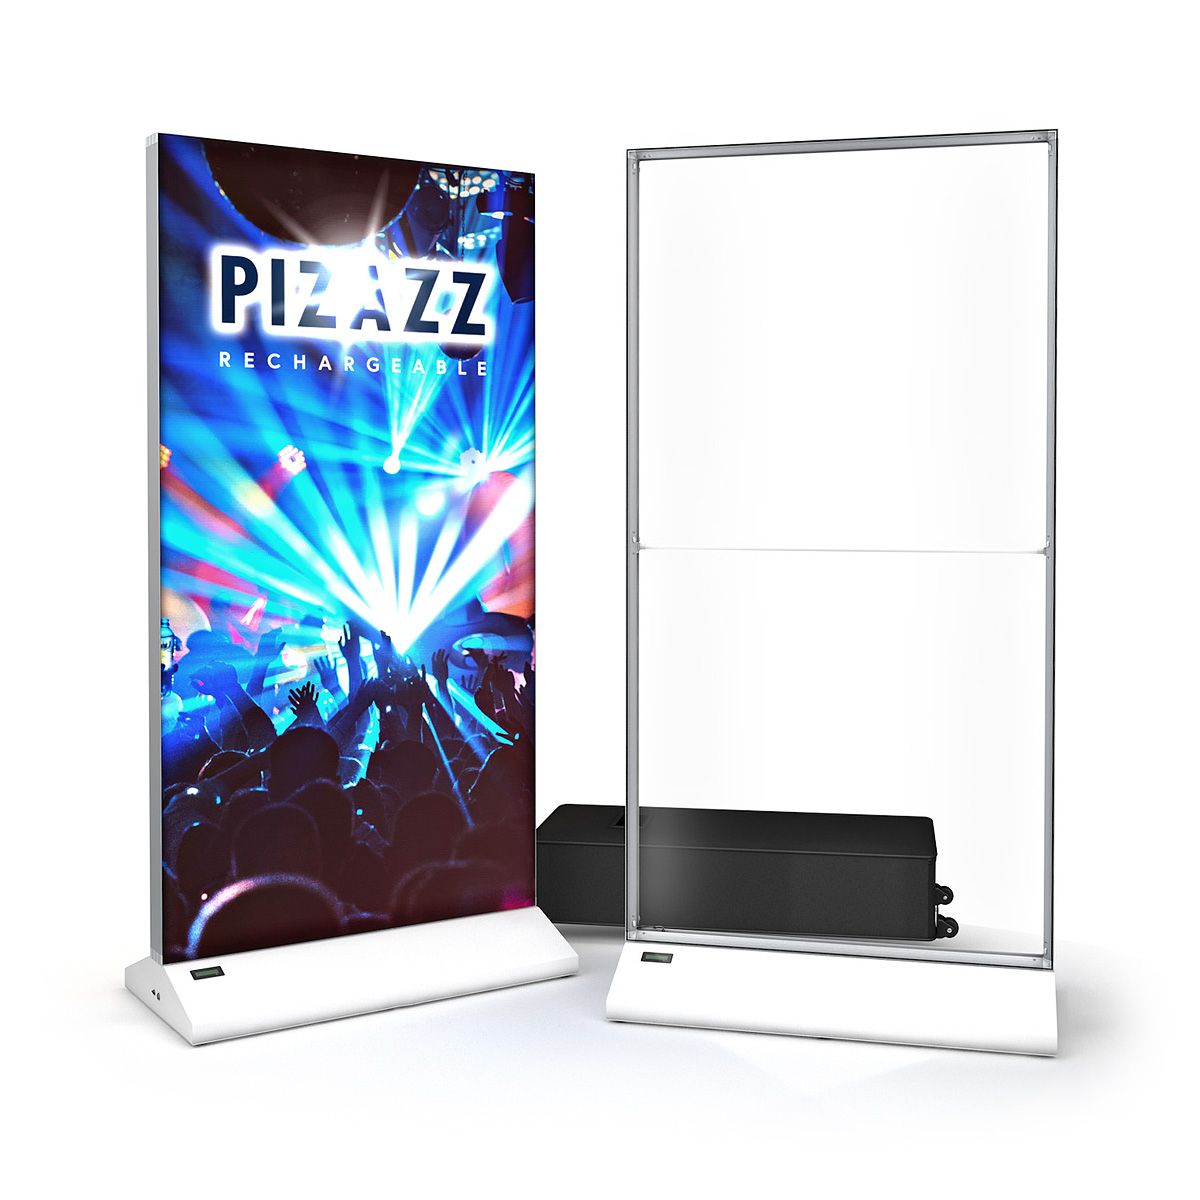 PIZAZZ® Portable Rechargeable Battery Powered LED Lightbox